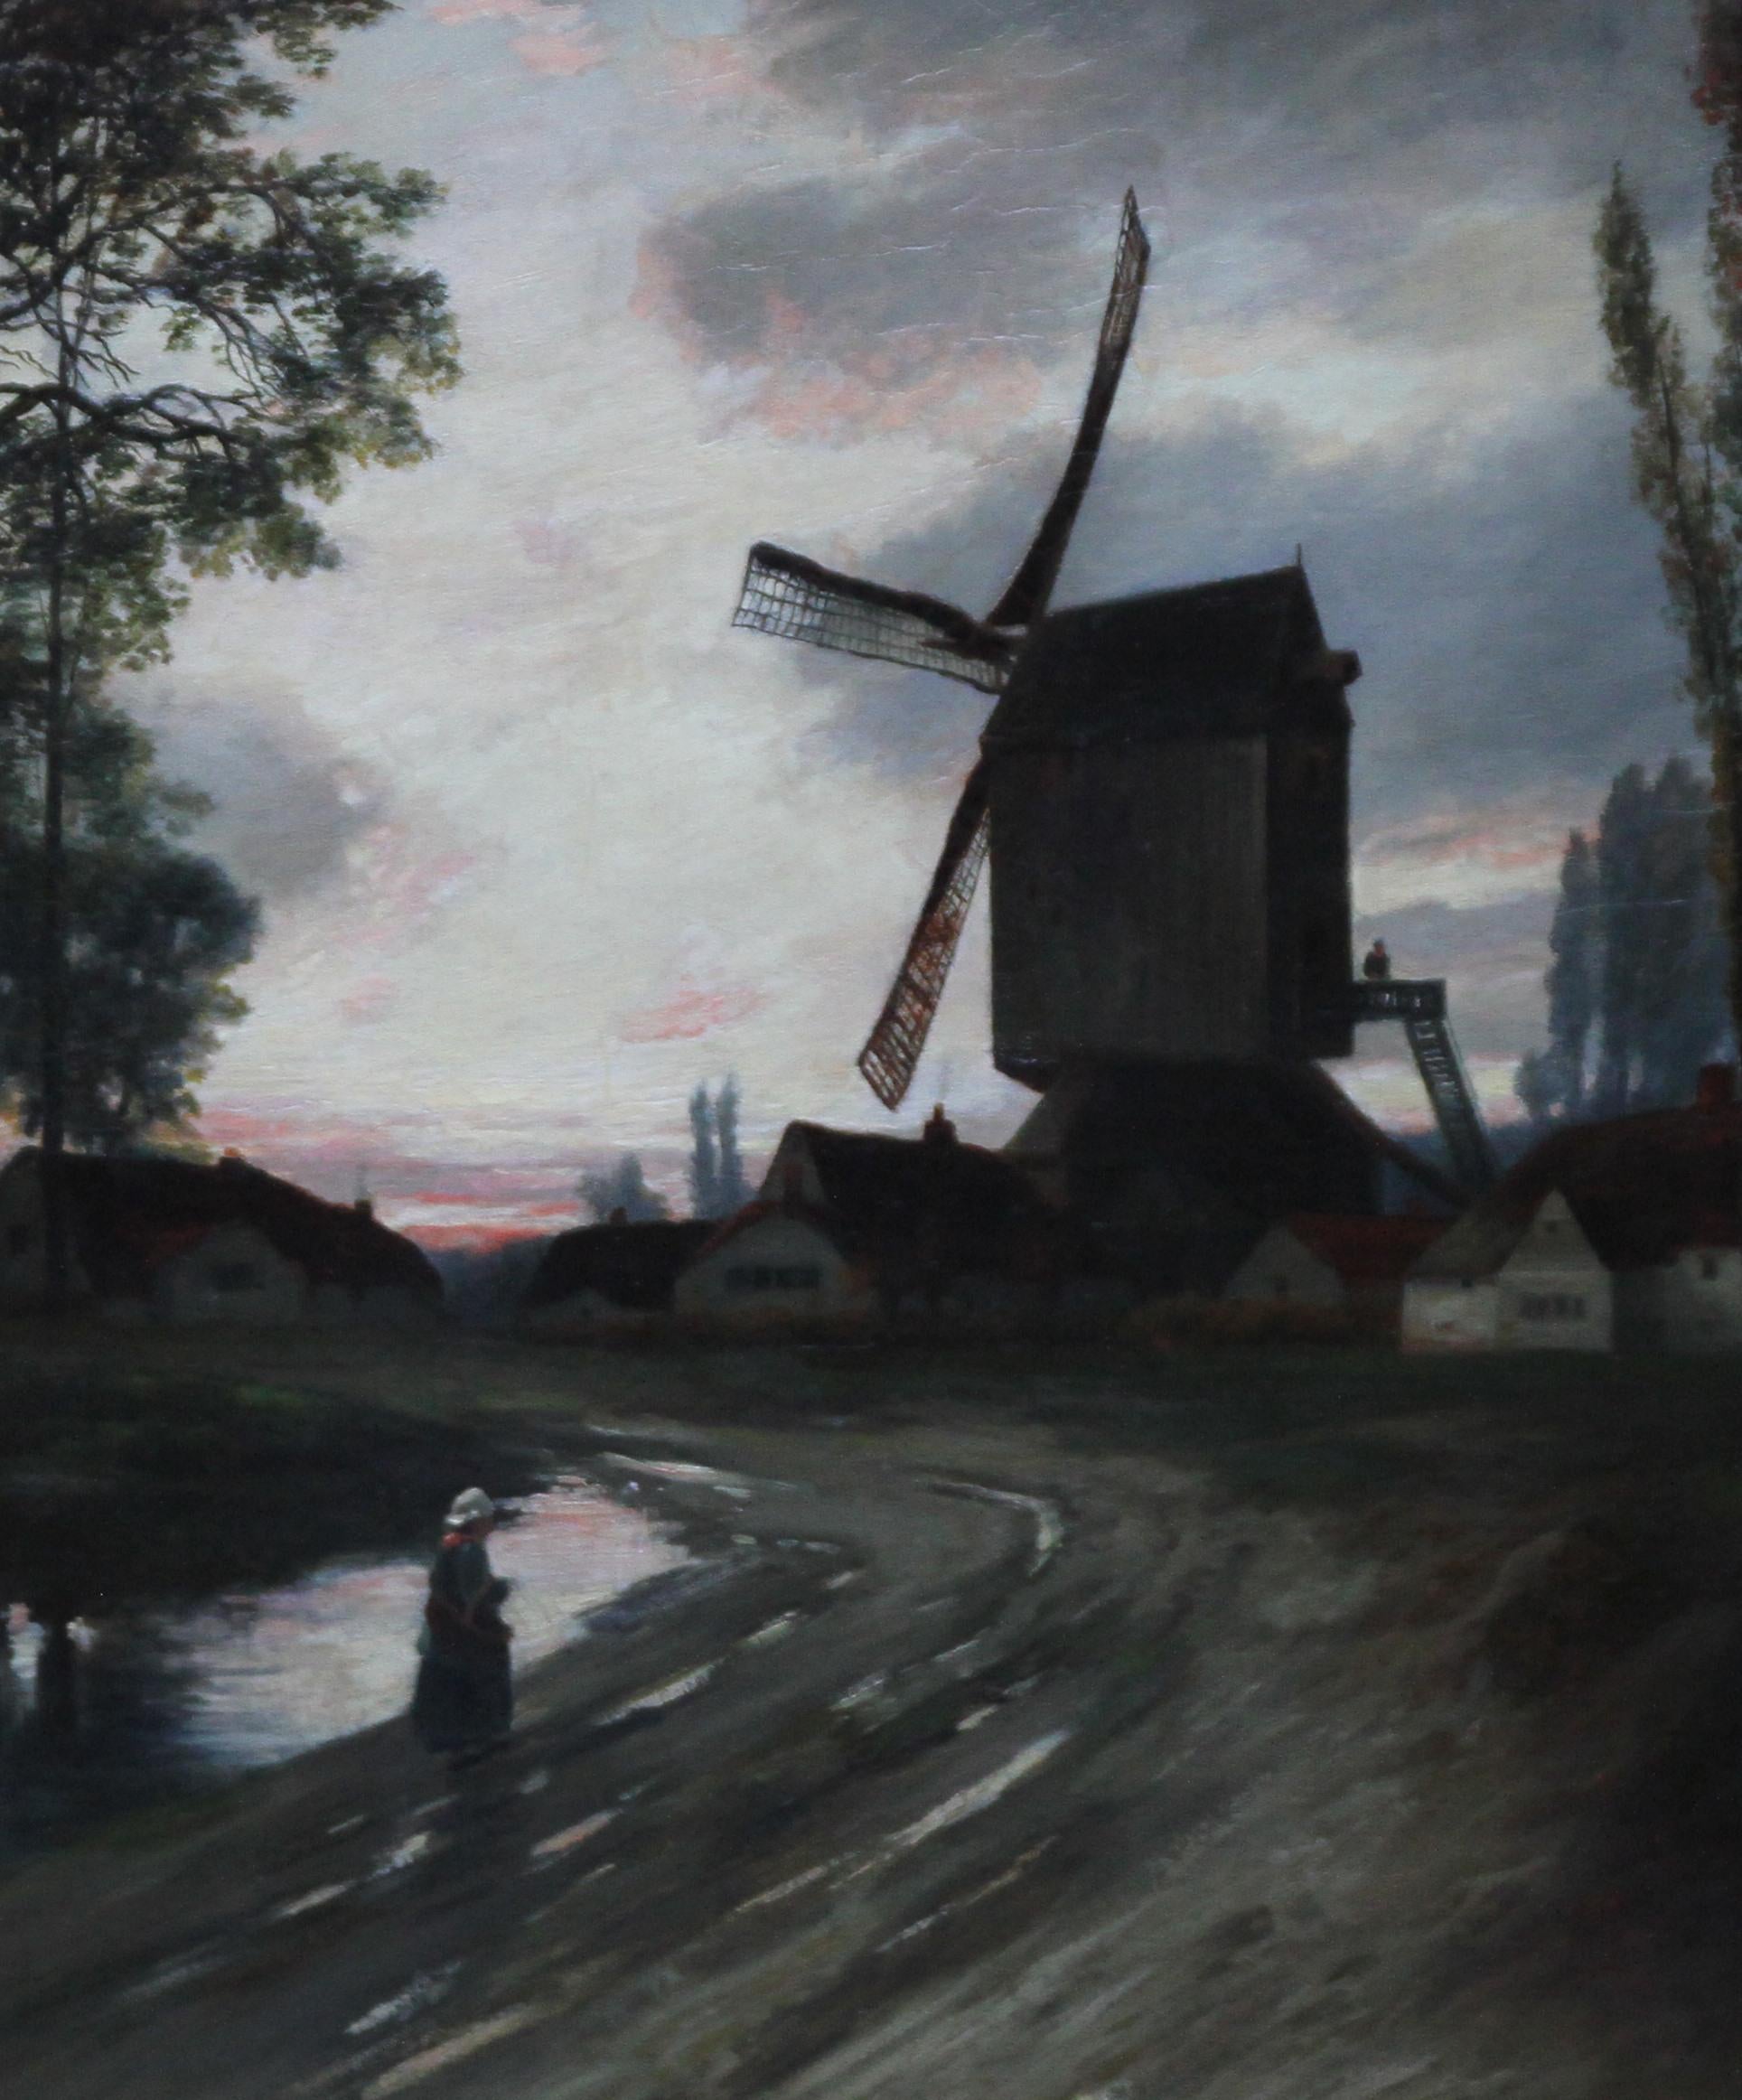 This beautiful oil on canvas circa 1880 is by Scottish artist William Beattie-Brown. The painting is of a windmill by a river at twilight. A  woman is walking by the water, possibly towards a figure who is looking out towards her from the windmill.